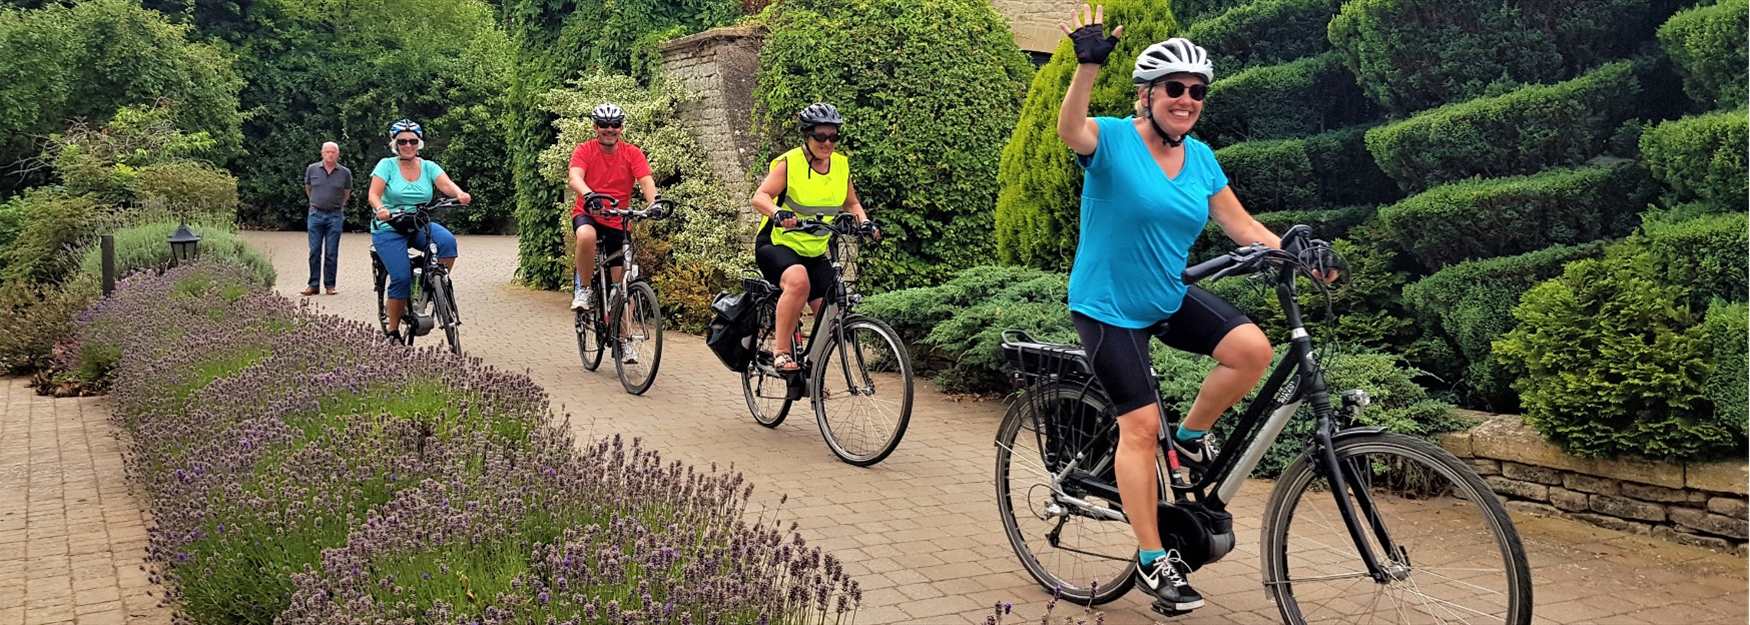 Oxford & the Cotswolds Highlights Cycle Tour